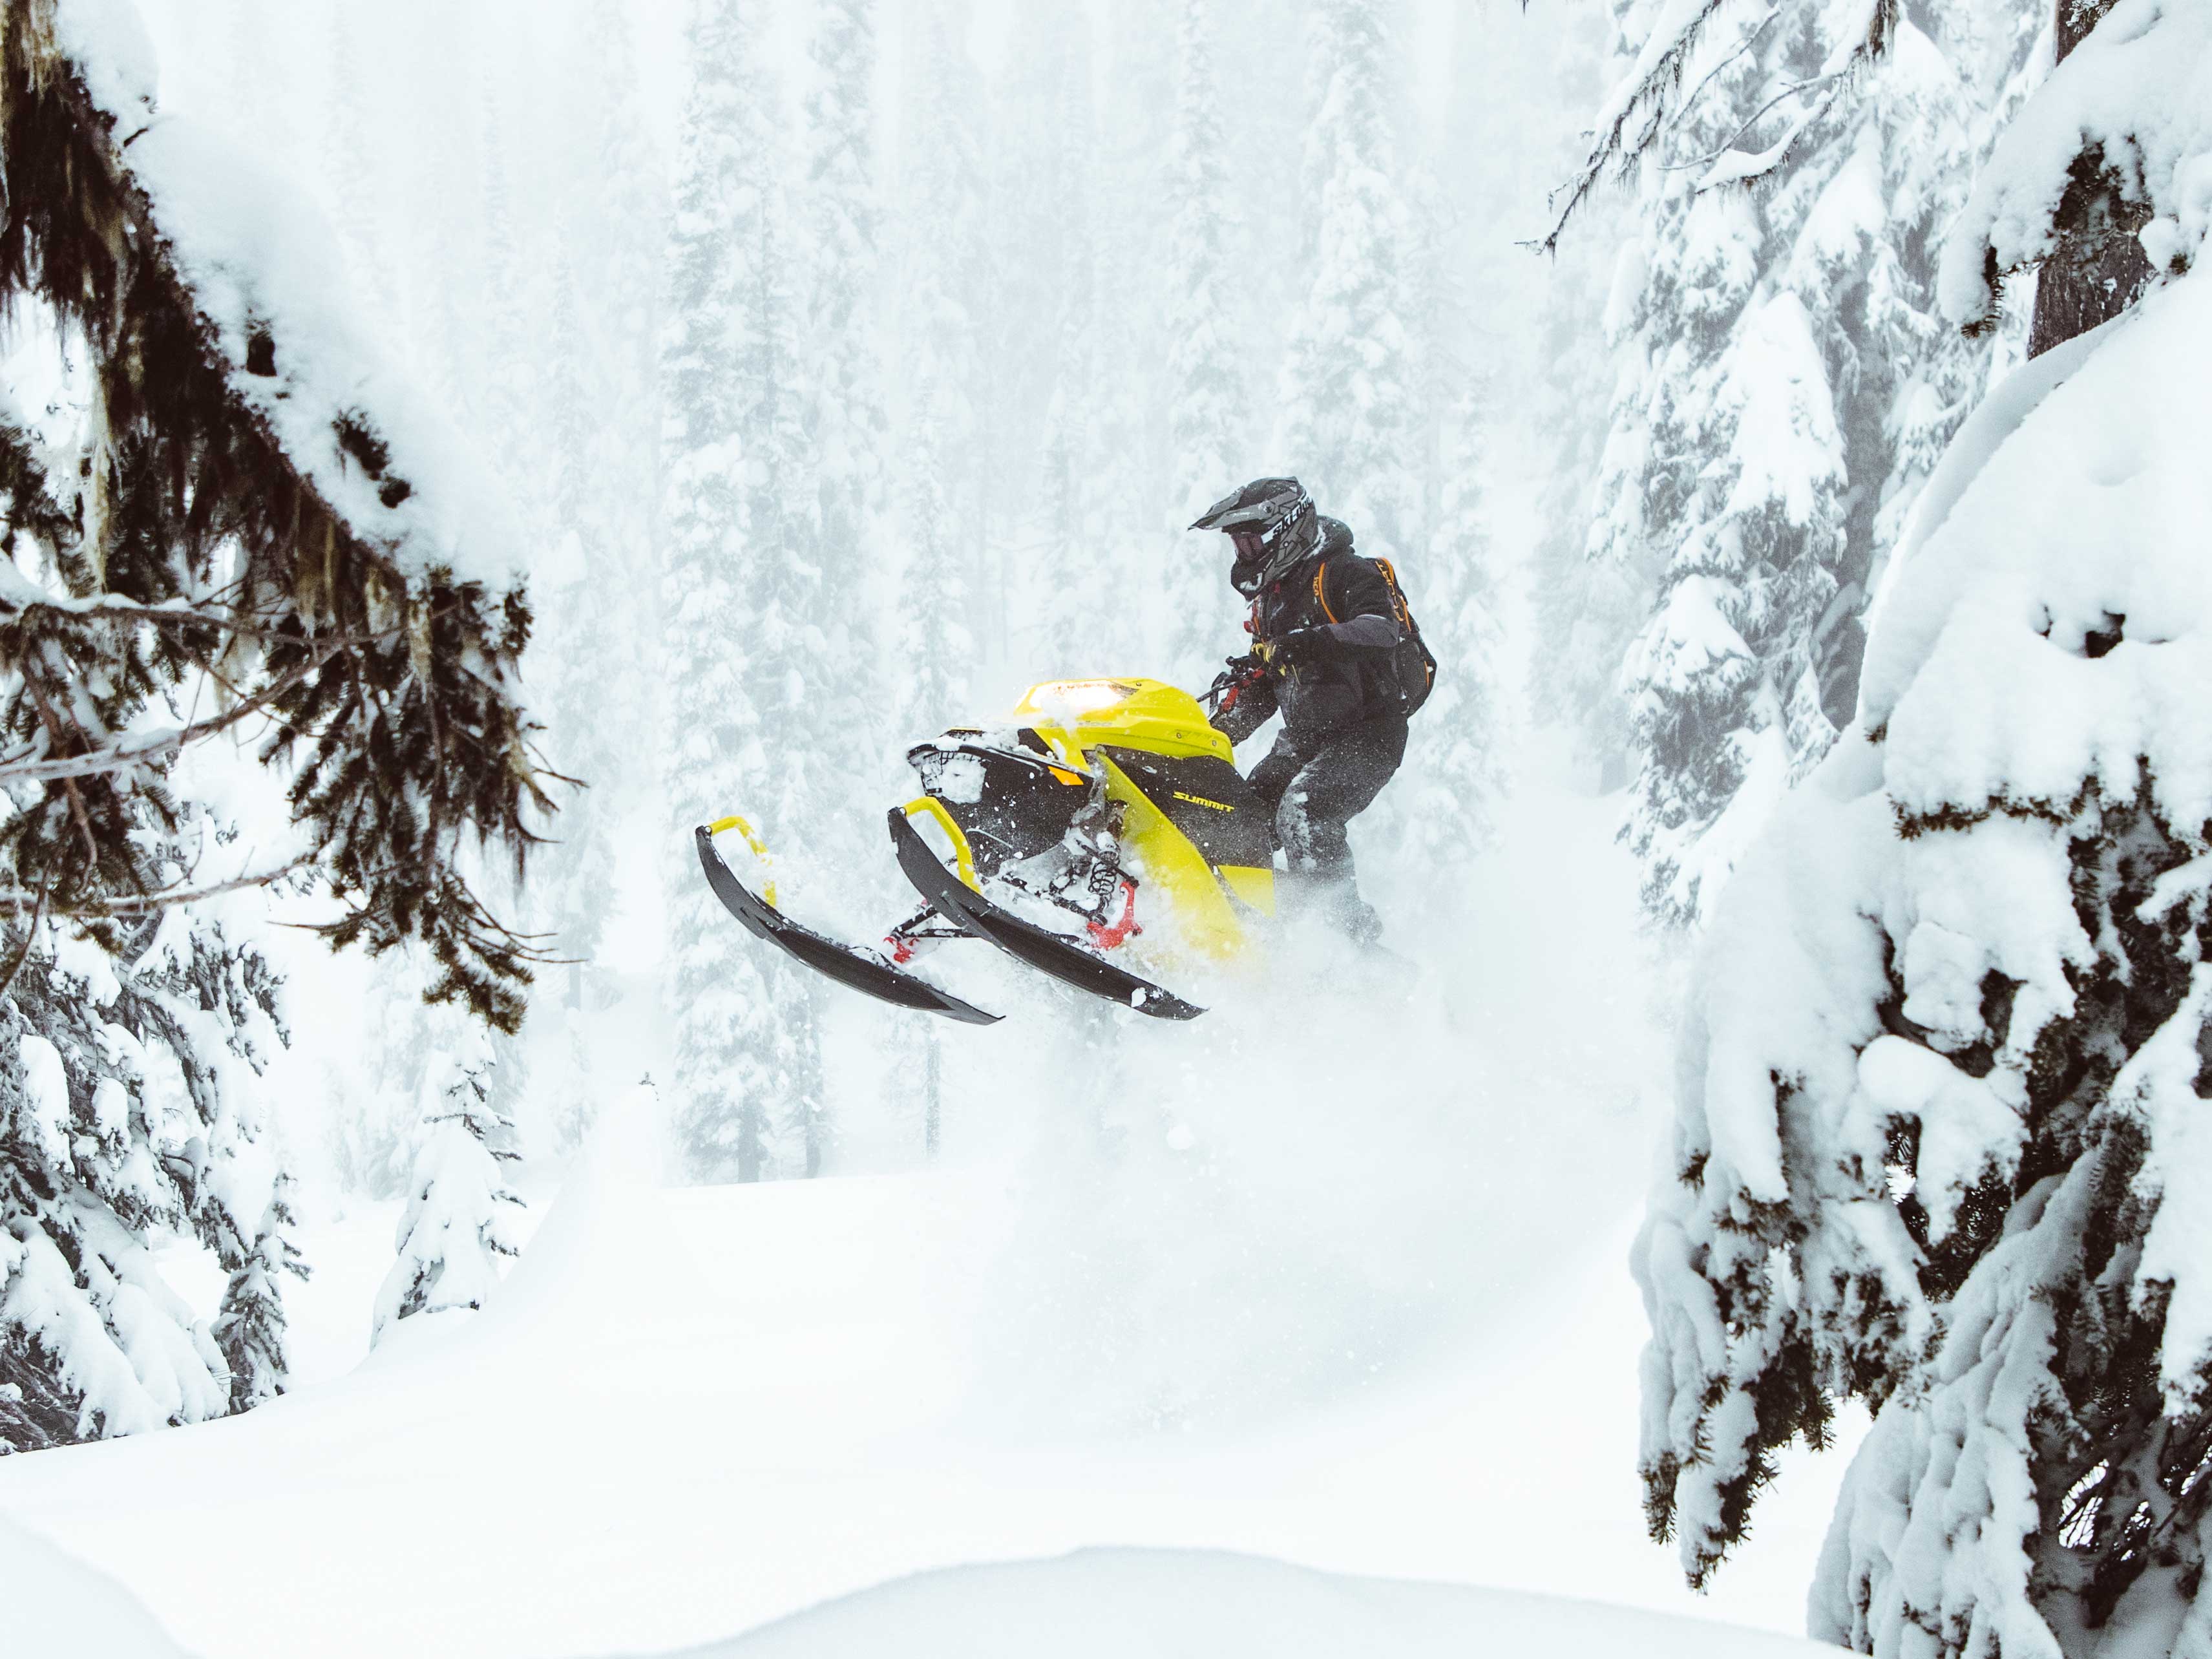 Carl Kuster jumping in Deep-Snow with his Ski-Doo Summit